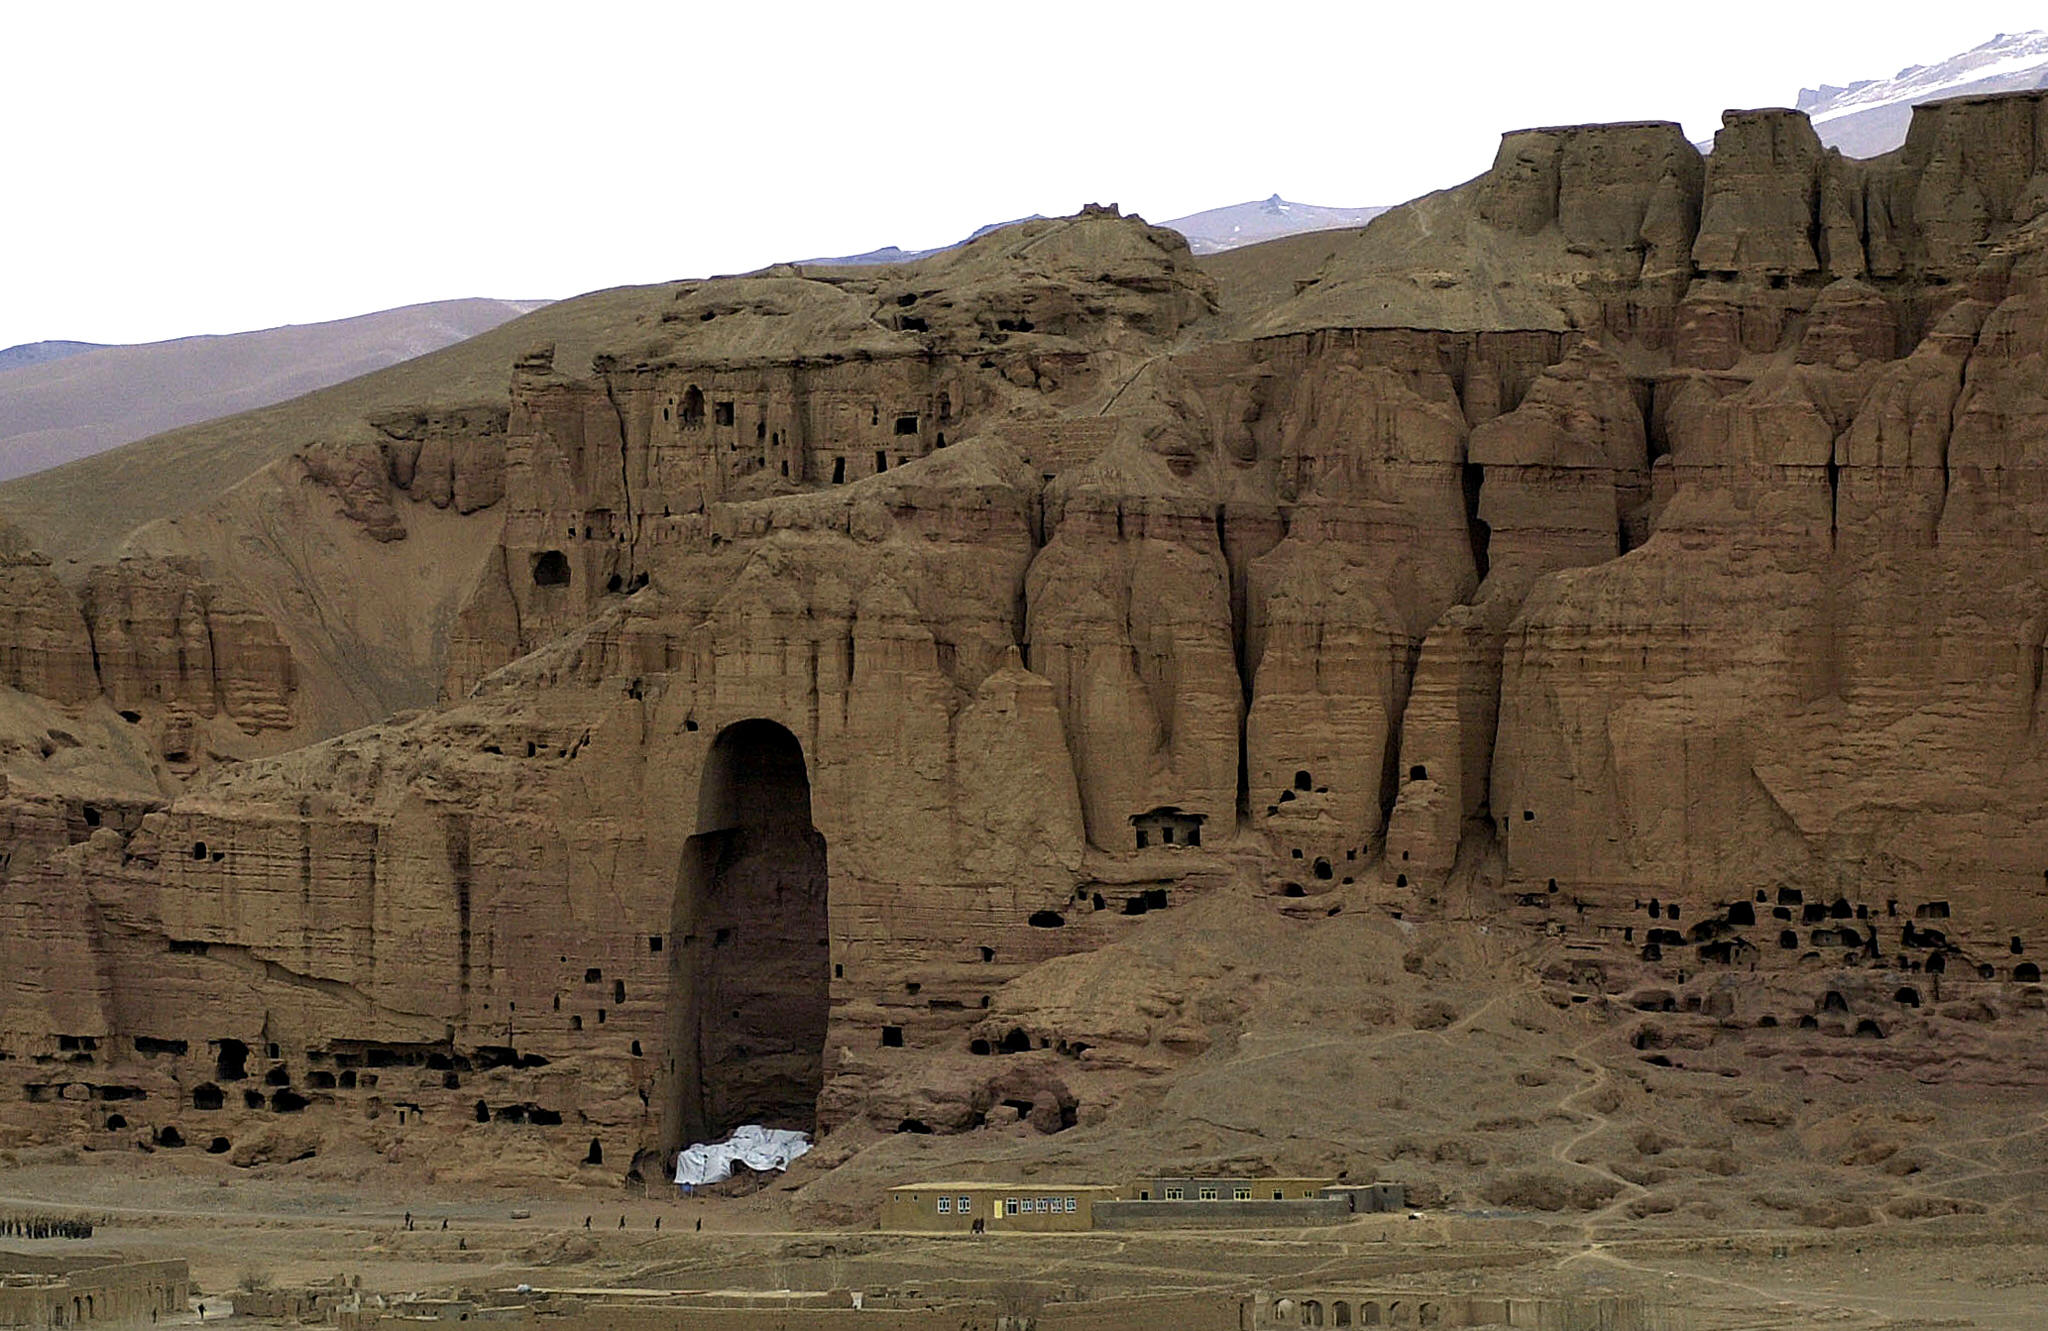 A view of the giant Buddhas site in Bamiyan, 29 January 2003 some 200 kms (125 miles) northwest of Kabul.The fate of the giant Buddhas of Bamiyan, ancient Afghan statues which were destroyed 